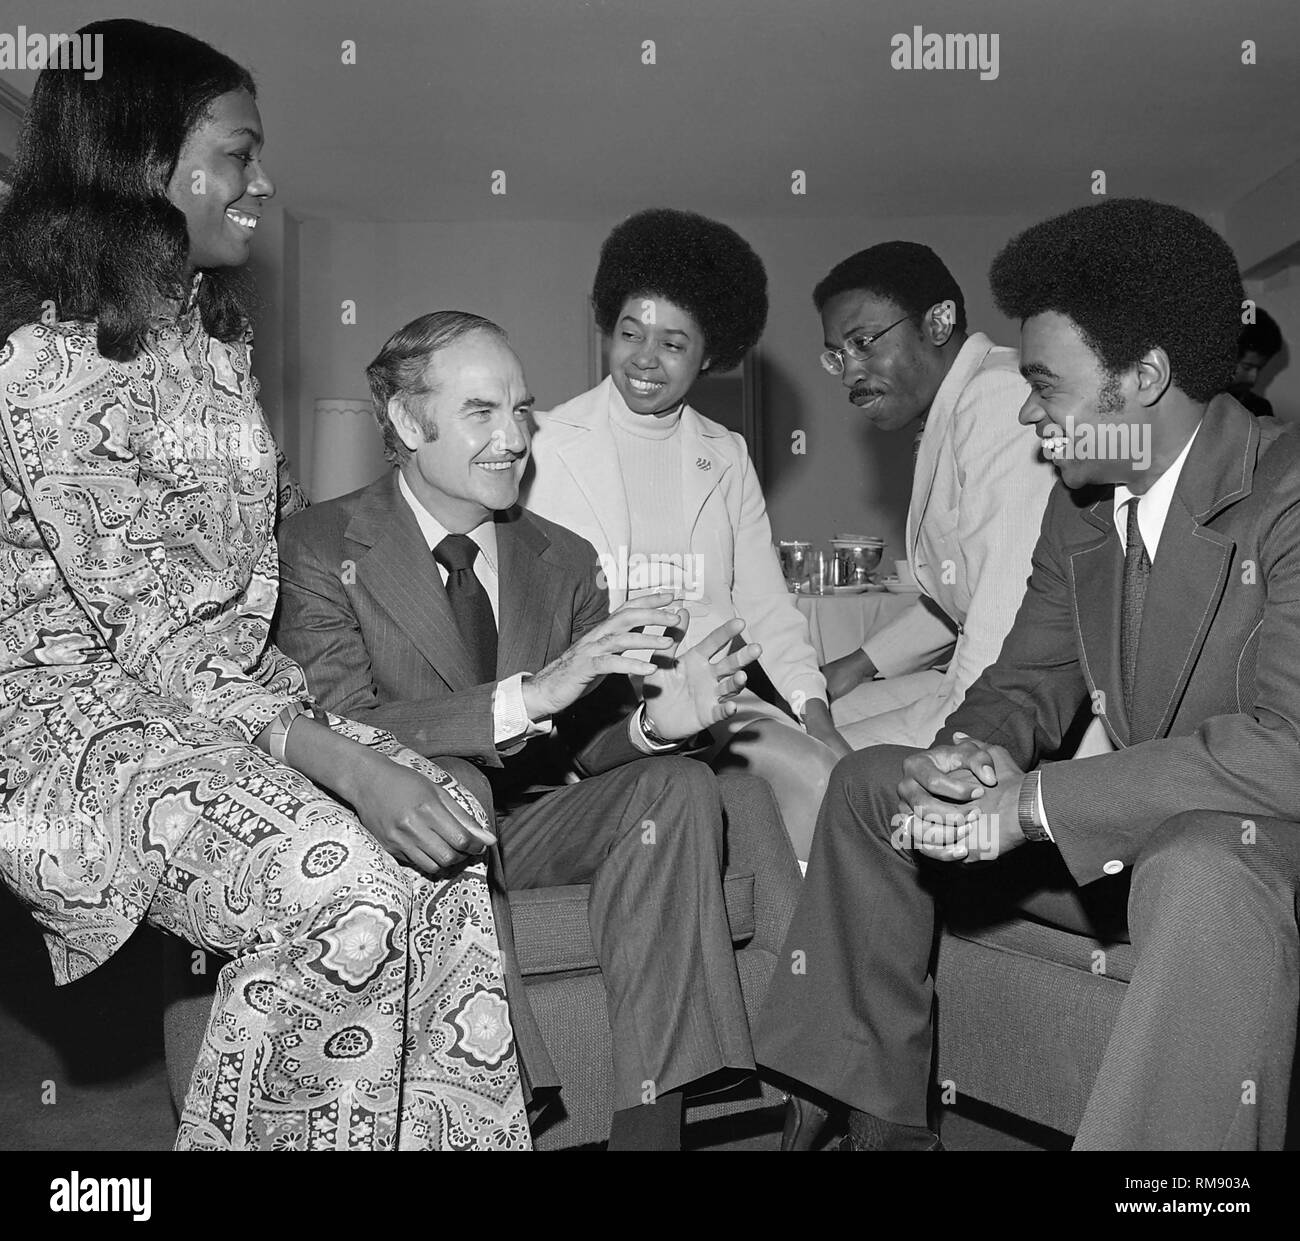 Presidential candidate George McGovern meets with a group of African American voters before a fundraising concert in April 15, 1972 at The Forum in Los Angeles featuring James Taylor, Carole KIng, Barbra Streisand and Quincy Jones. Stock Photo